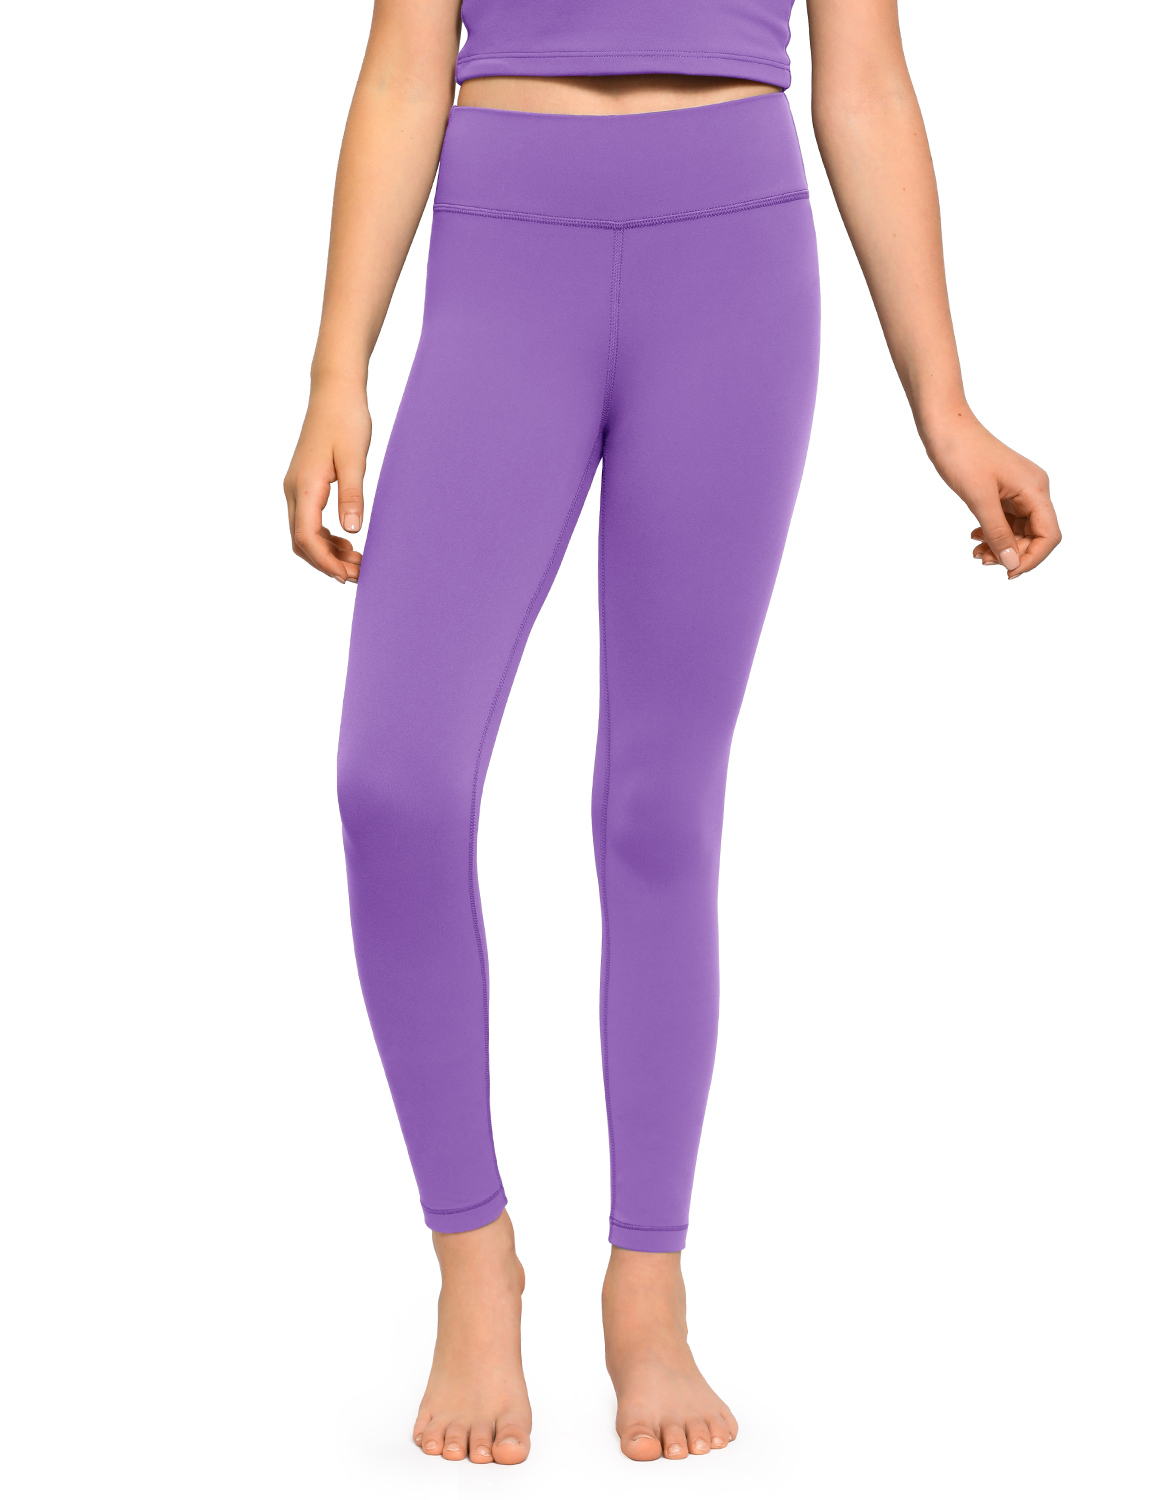  CRZ YOGA Womens Butterluxe High Waisted Lounge Legging 19  Inches - Workout Leggings Buttery Soft Capris Yoga Pants (Neon) Light  Purple XX-Small : Clothing, Shoes & Jewelry